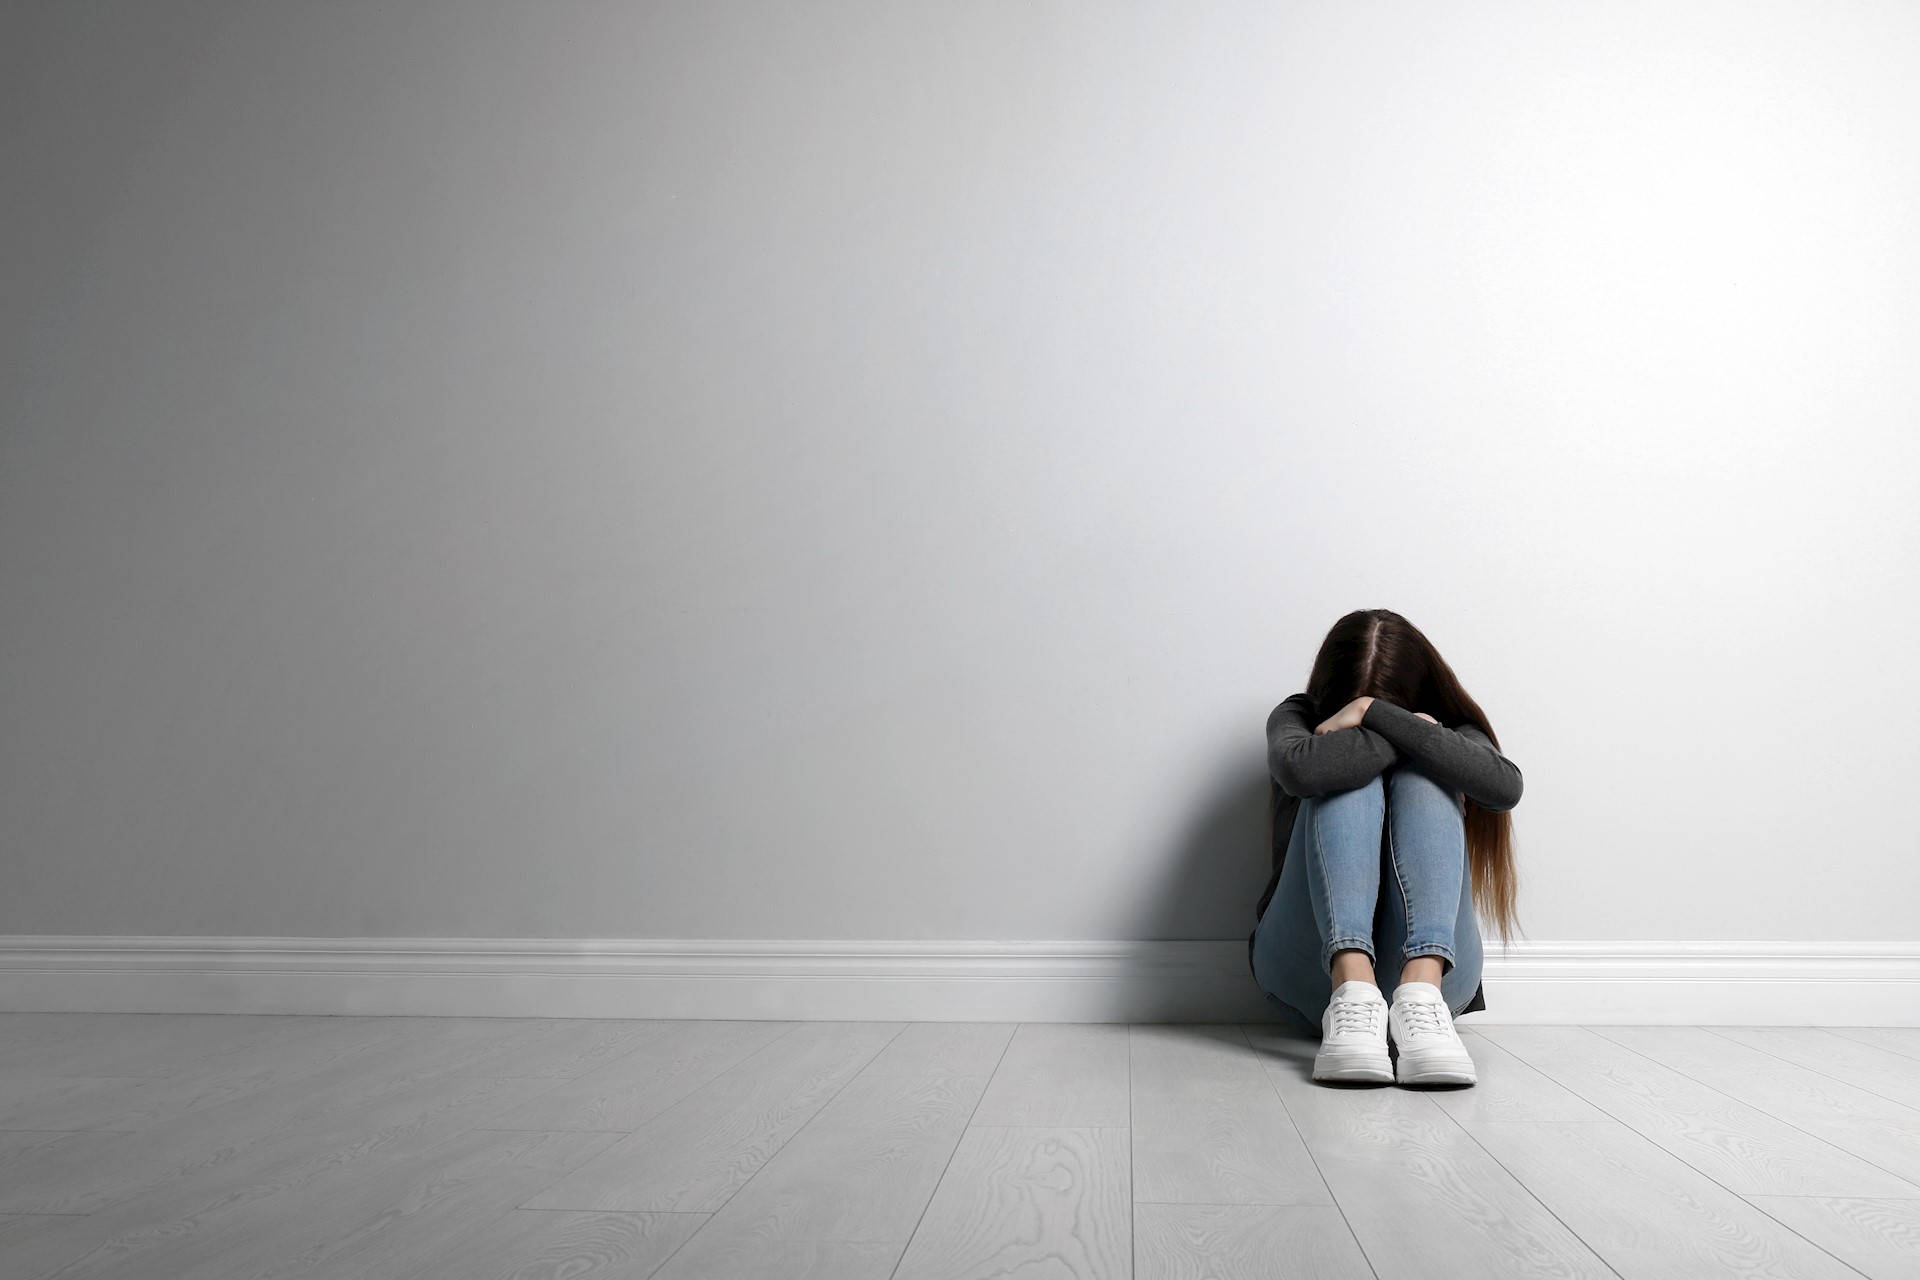 Life in middle school: Depression is a growing concern for teens